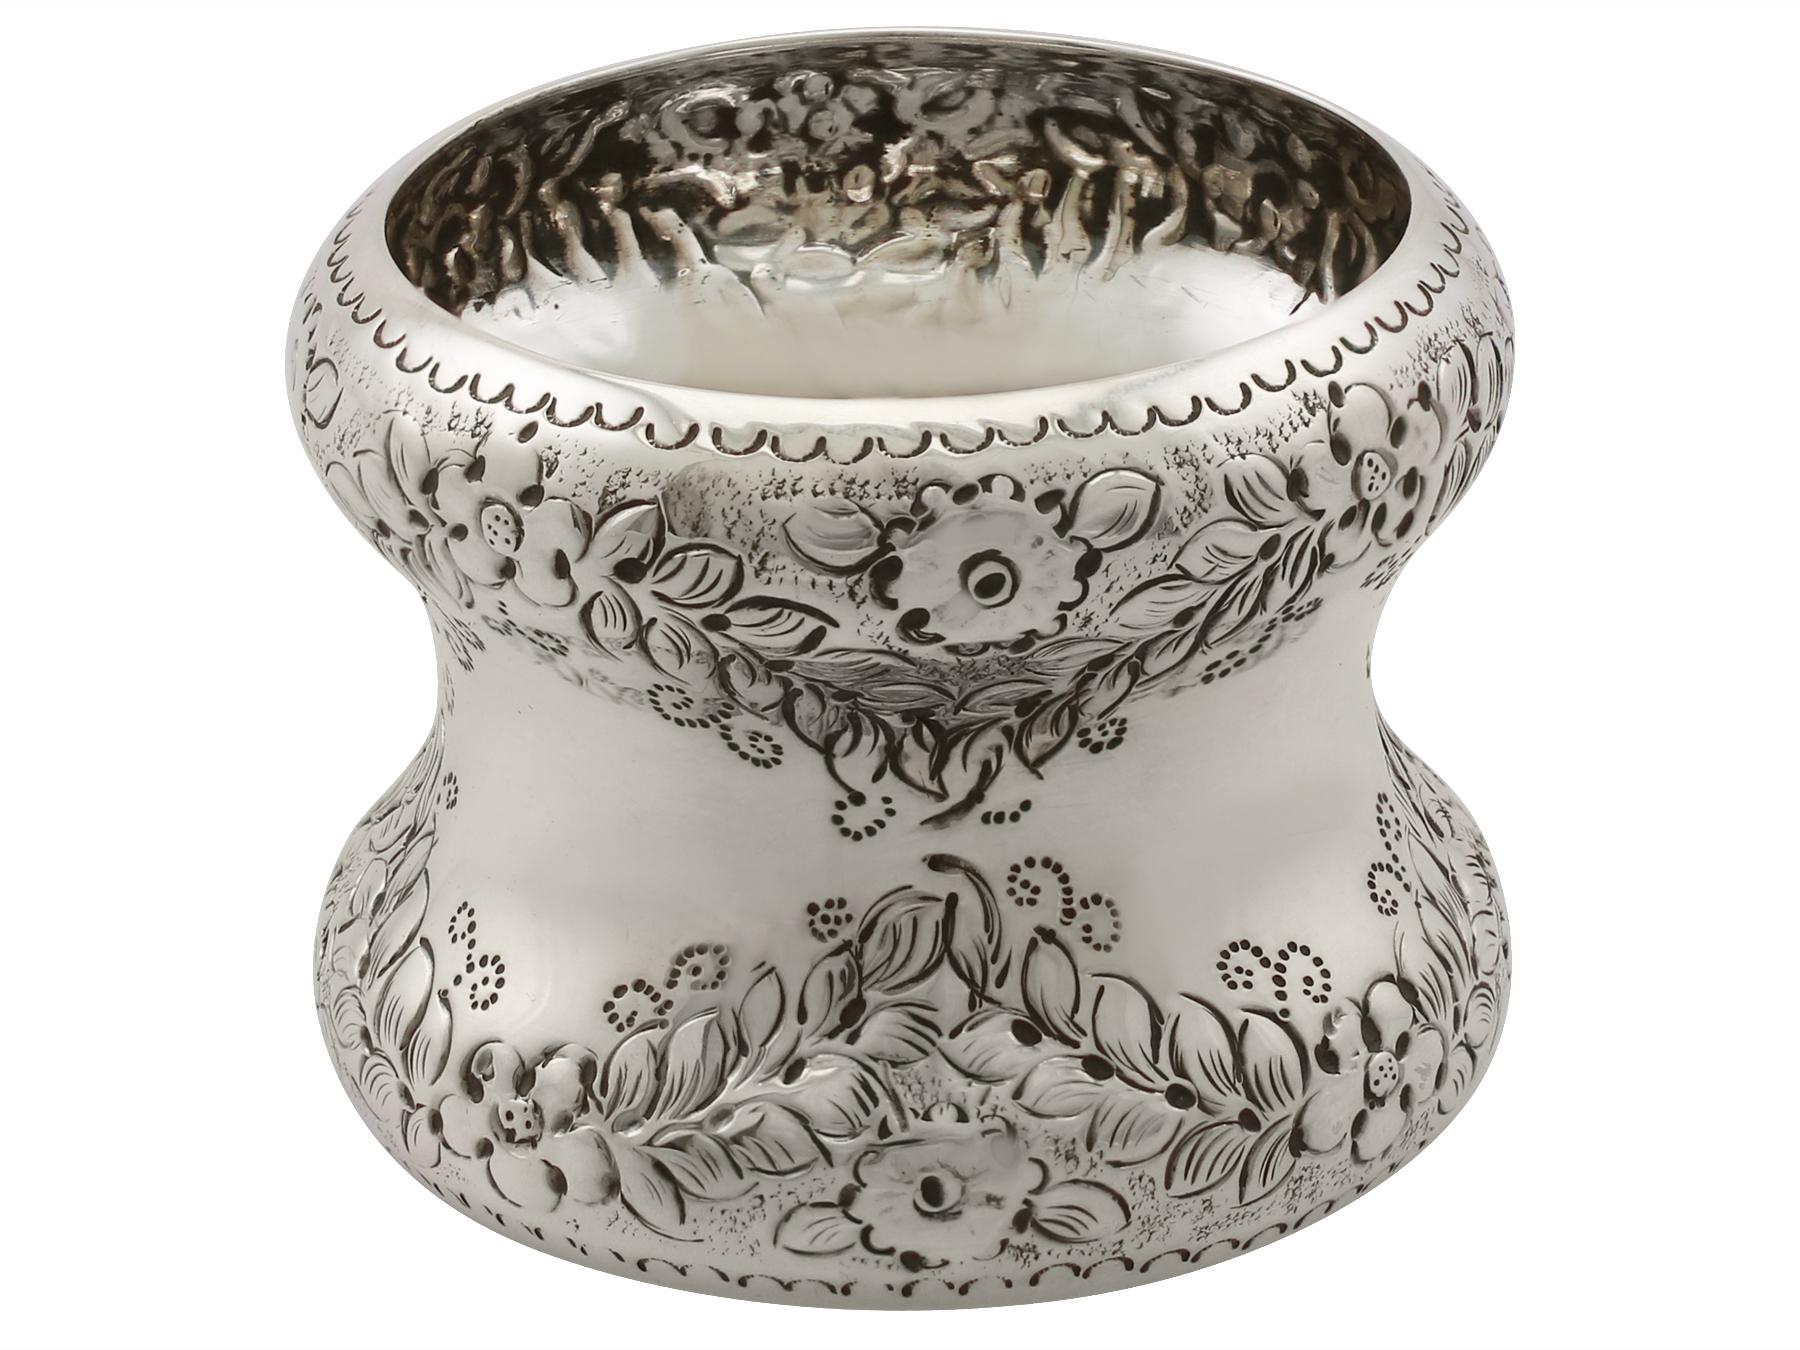 Early 20th Century Antique Edwardian Sterling Silver Napkin Rings